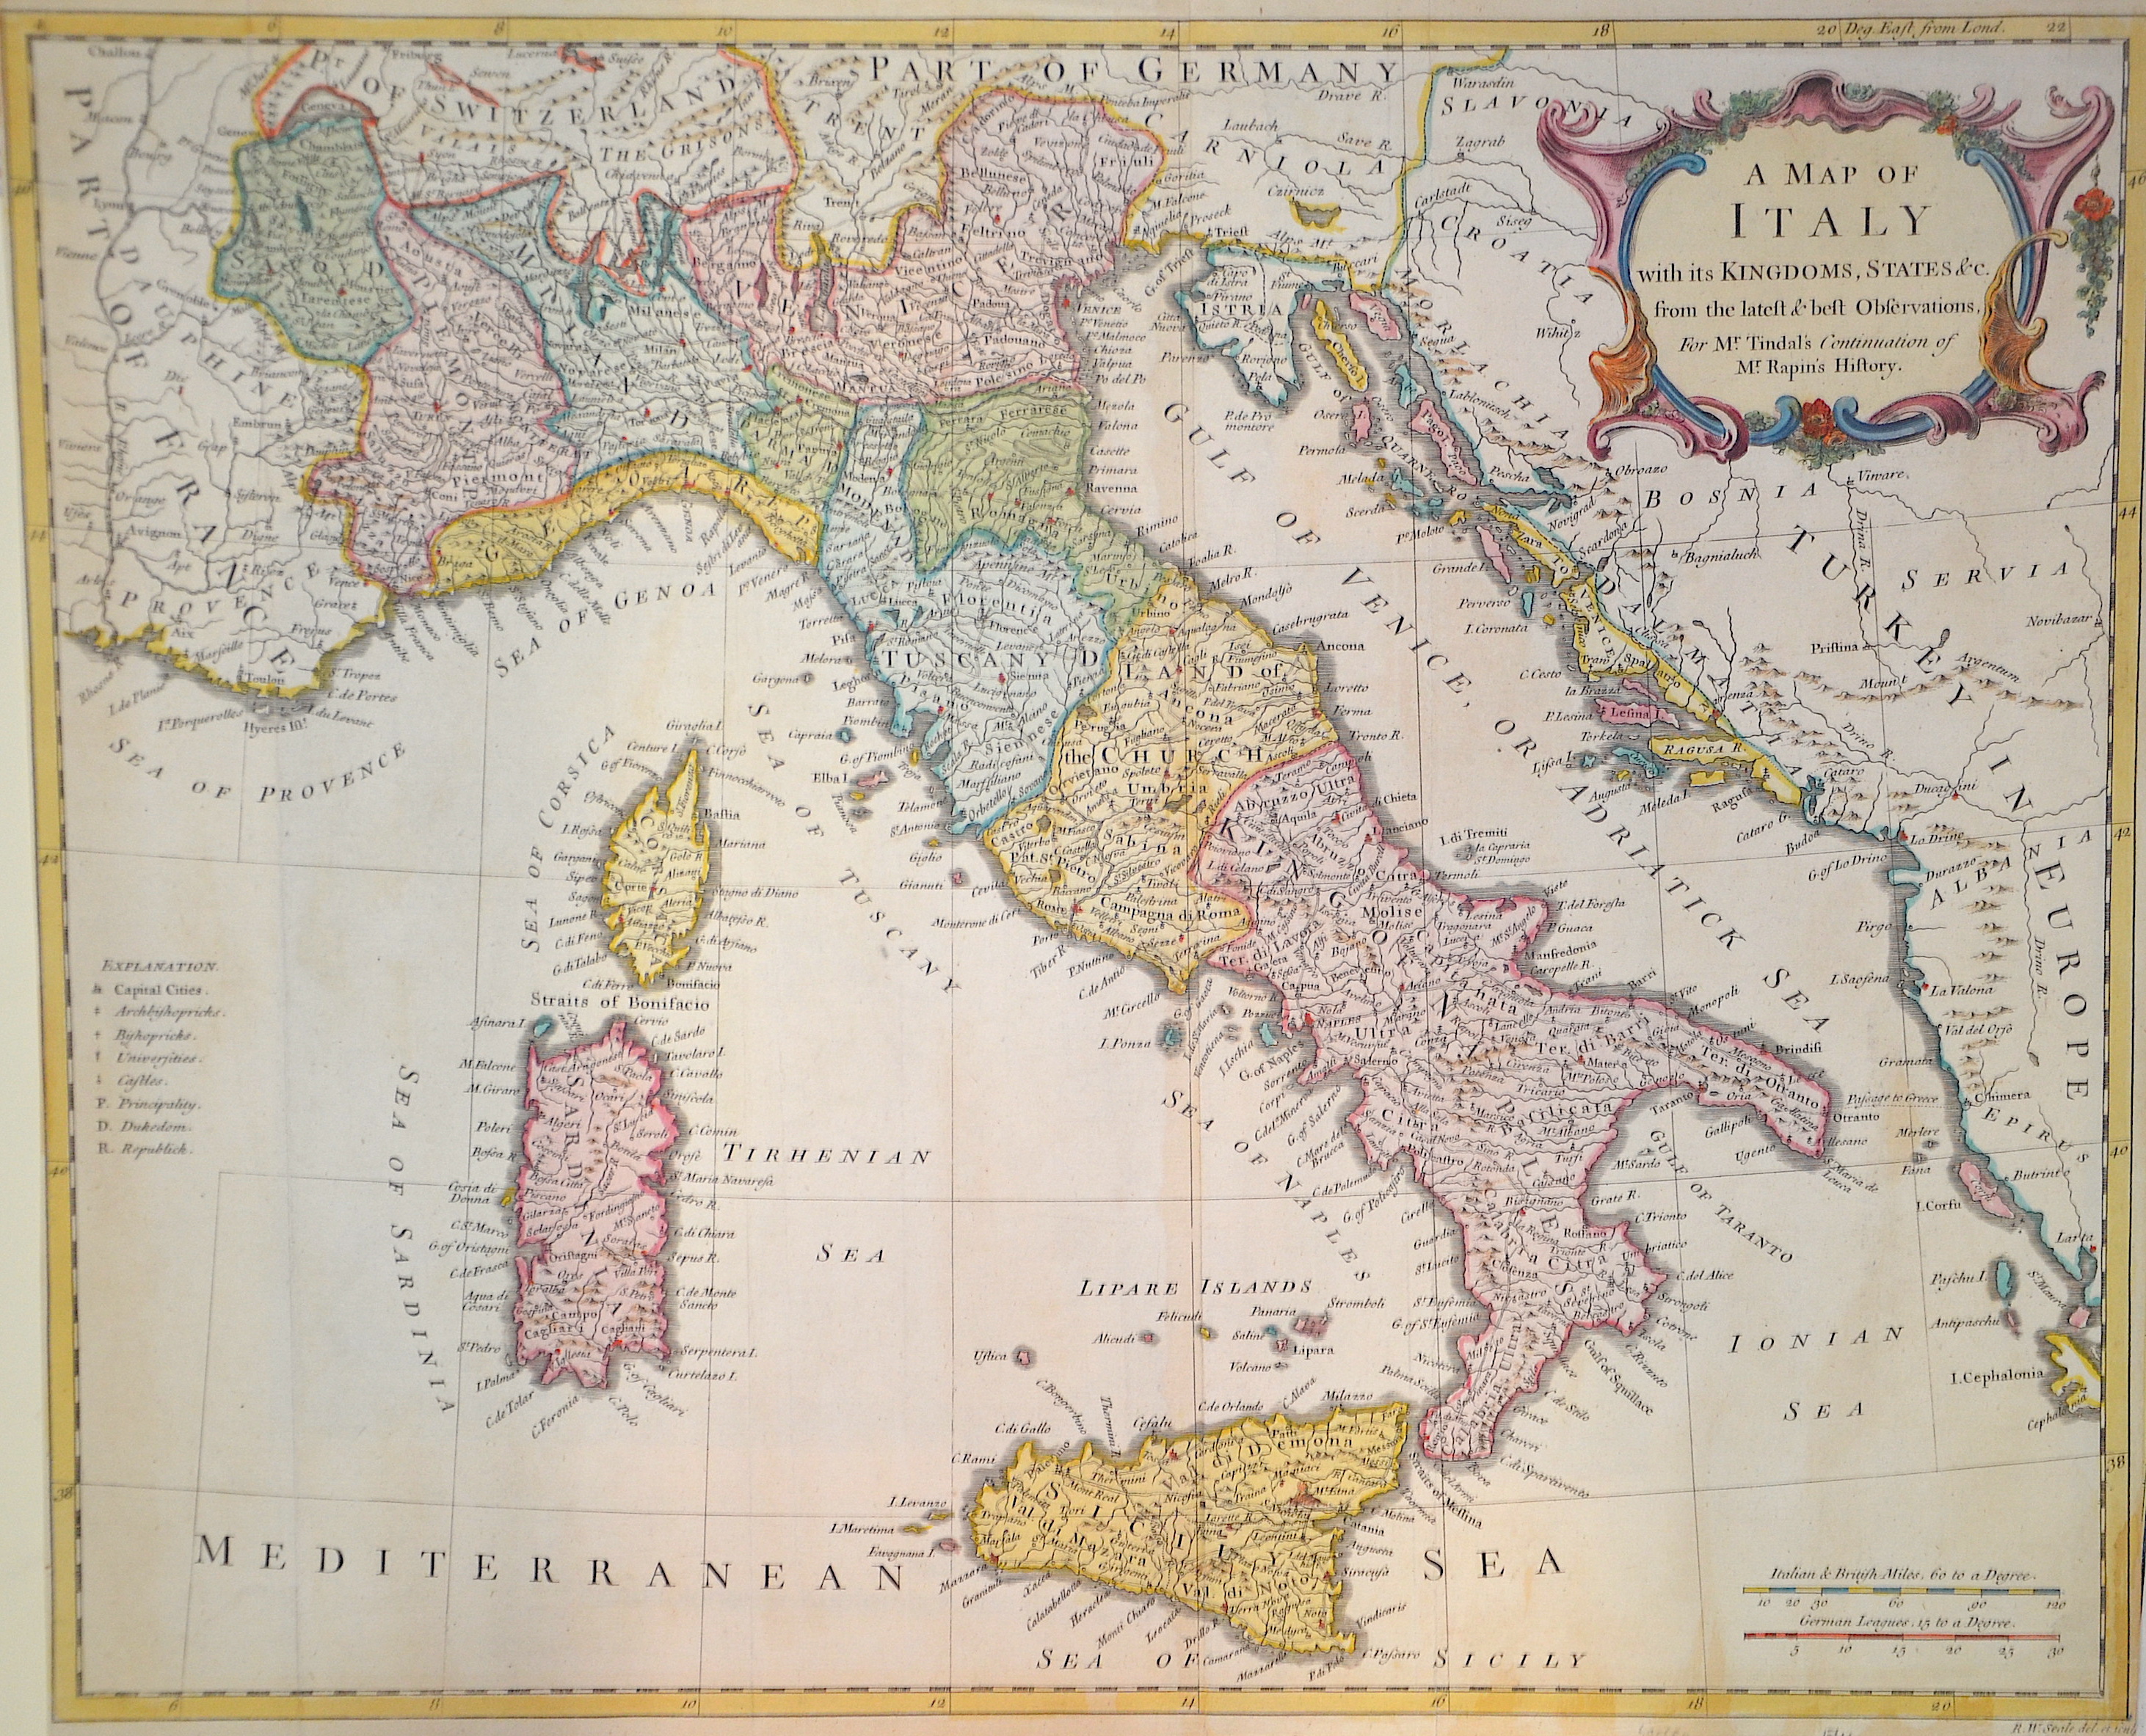 Seale Richard William A map of Italy with ist Kingdoms, States and..  for Mr Tindal’s Continuation of Mr Rapins History.